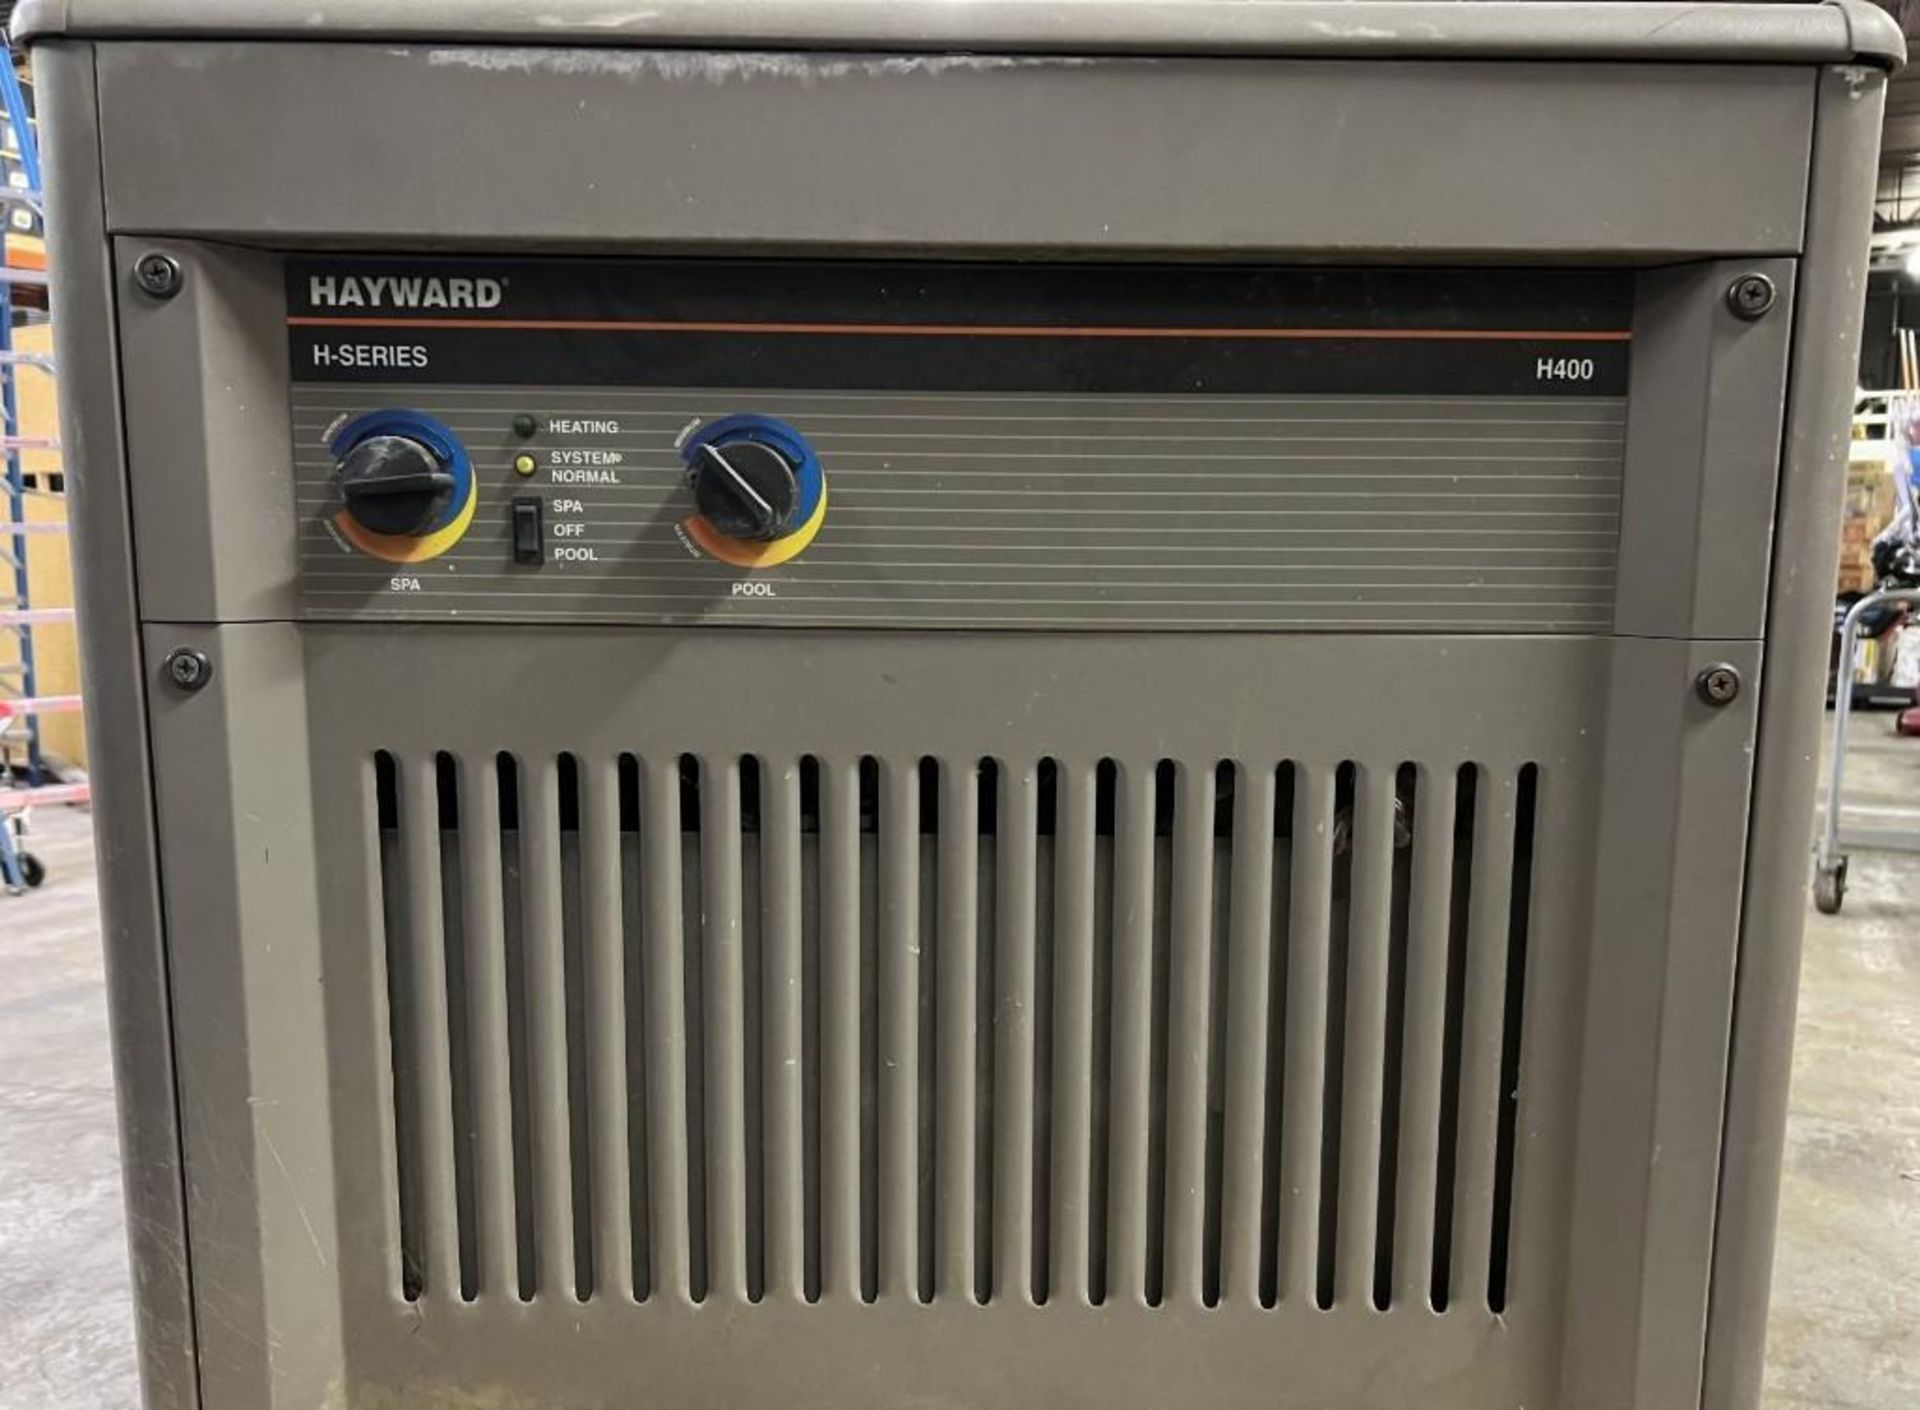 Hayward H Series Pool Heater H400 (unused) (located offsite at: Located at: 3785 W 1987 S. SLC, UT 8